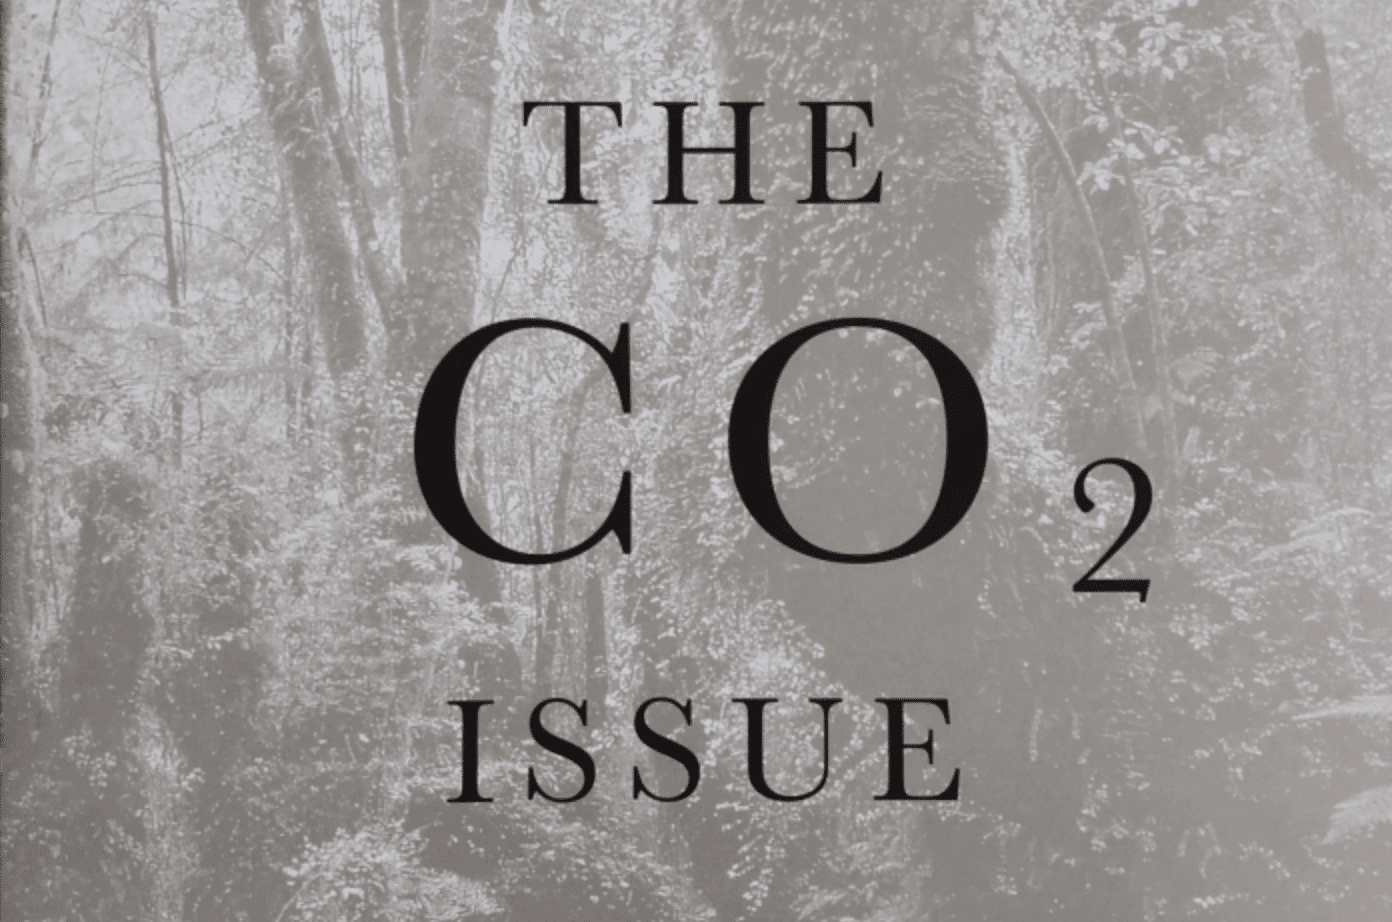 The CO2 Issue, Greening Earth Society, Western Fuels Association